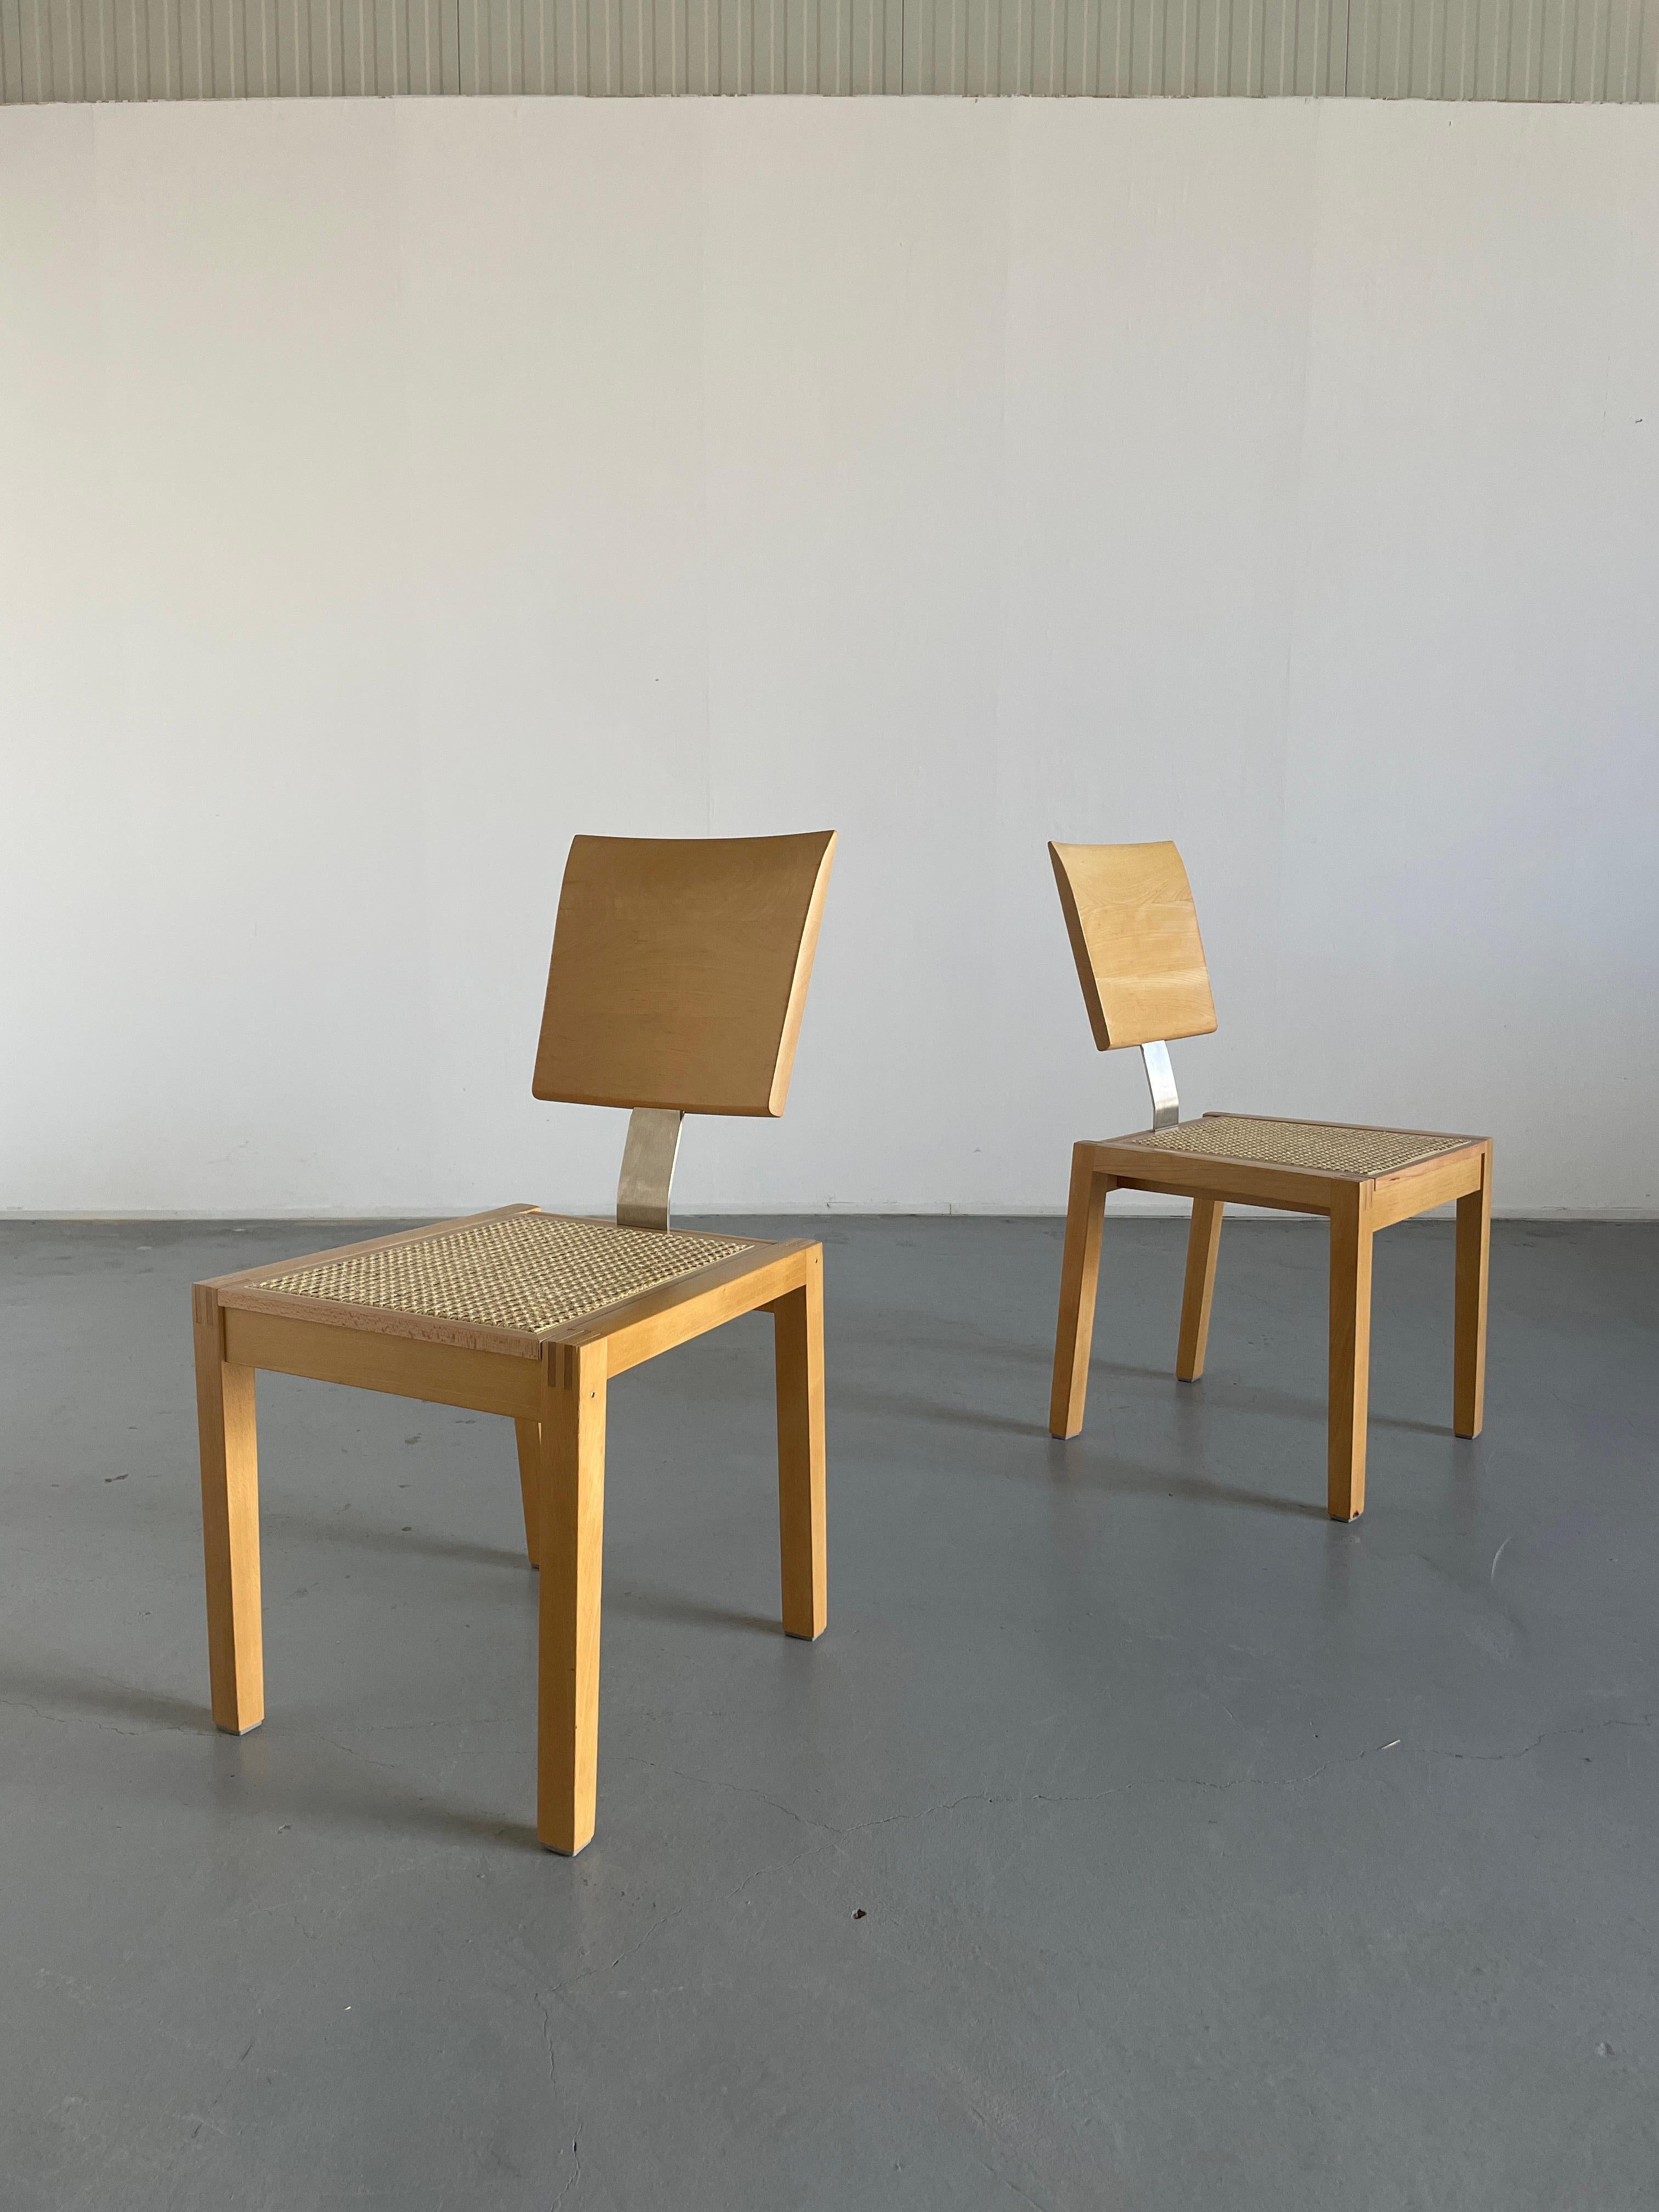 Post-Modern 1 of 2 Vintage Postmodern Geometrical Beechwood and Cane Dining Chairs, 1990s For Sale